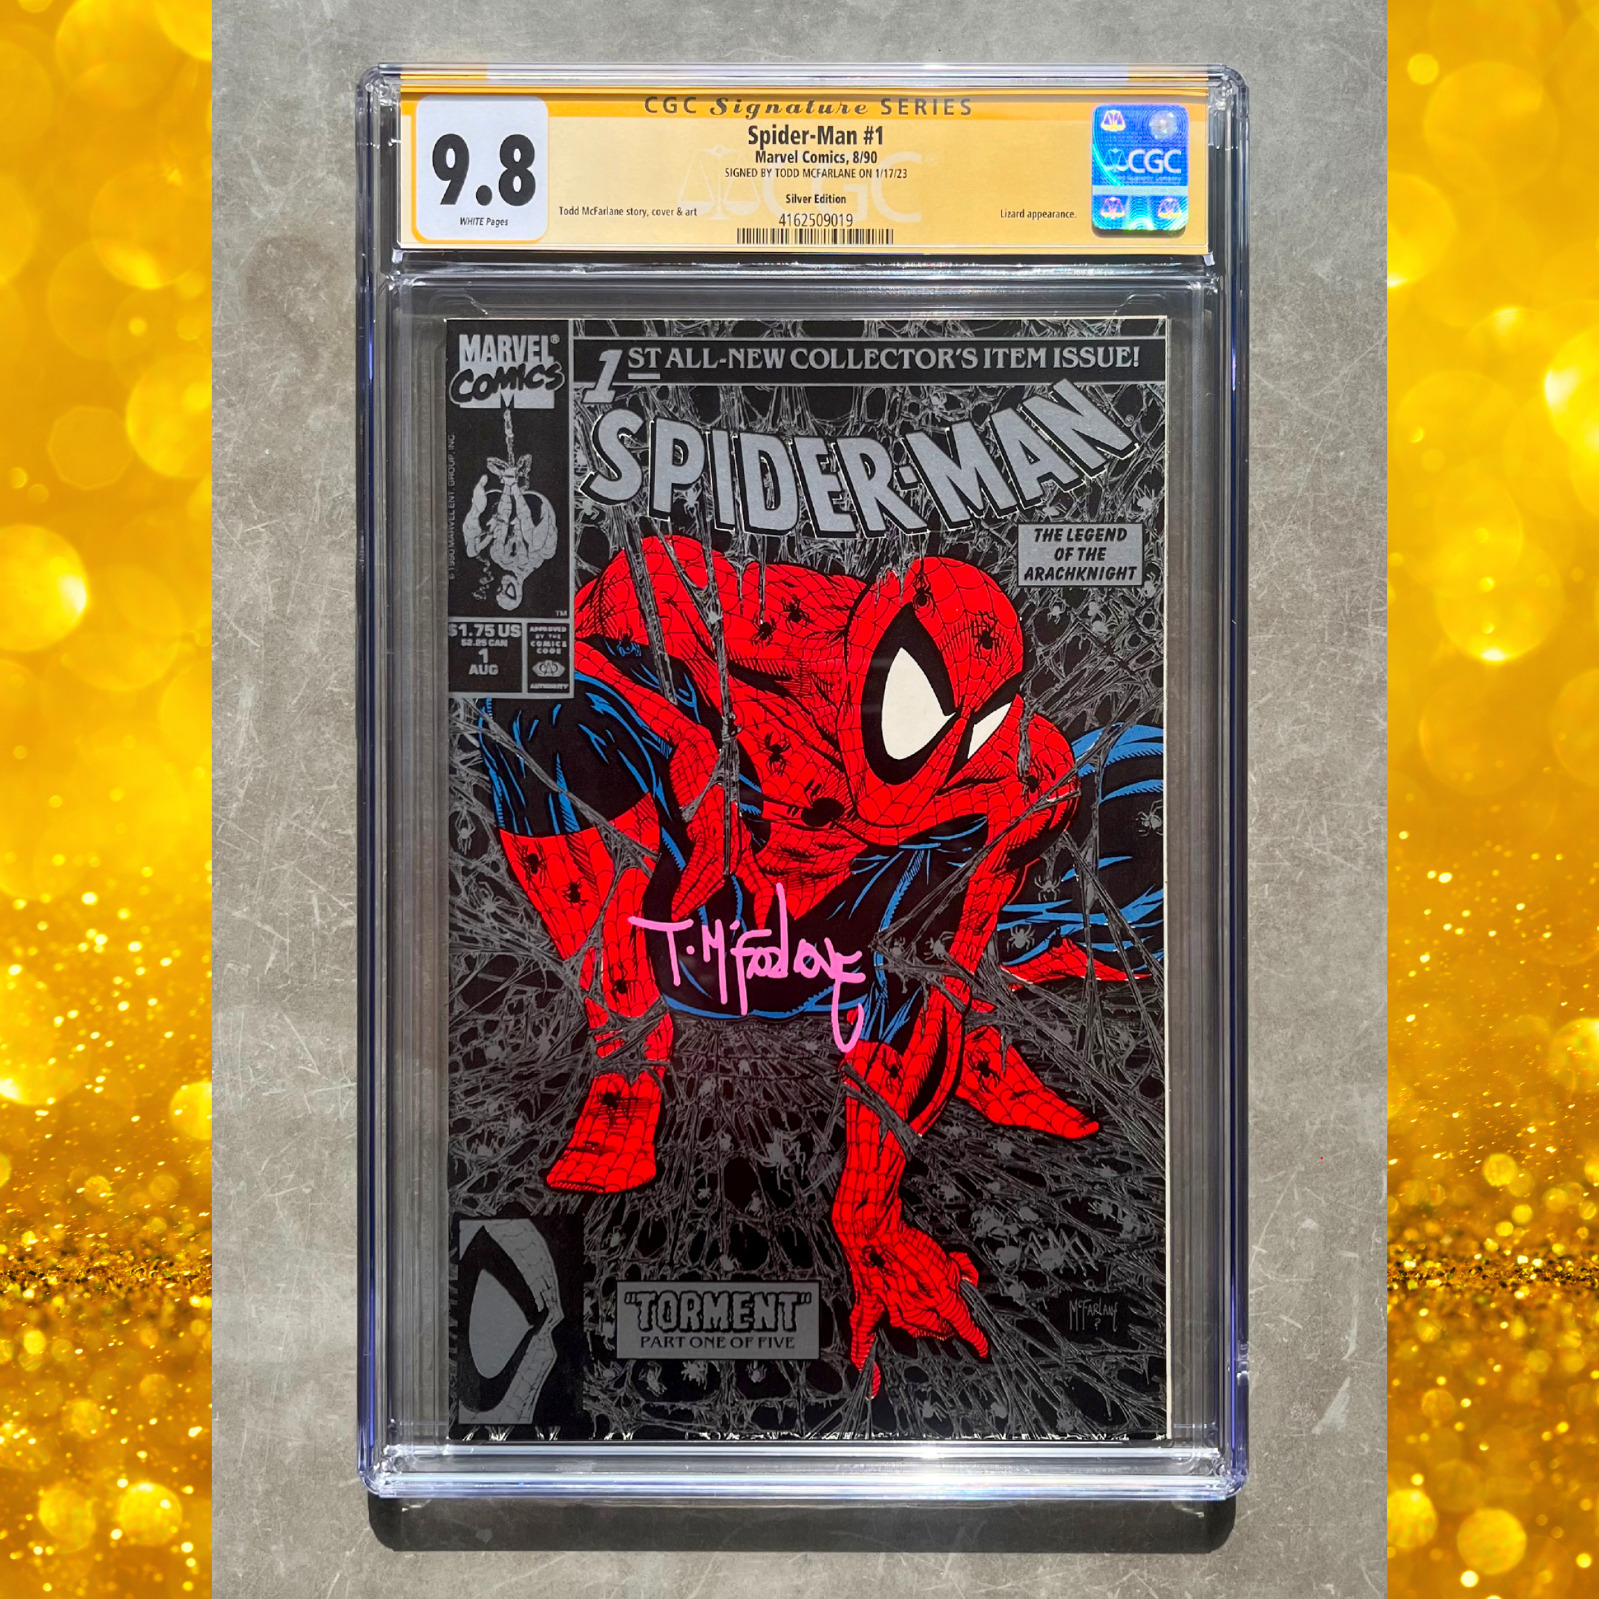 🔥 Spider-Man #1 CGC 9.8 Signed By Todd McFarlane – Iconic Silver Edition 🔥